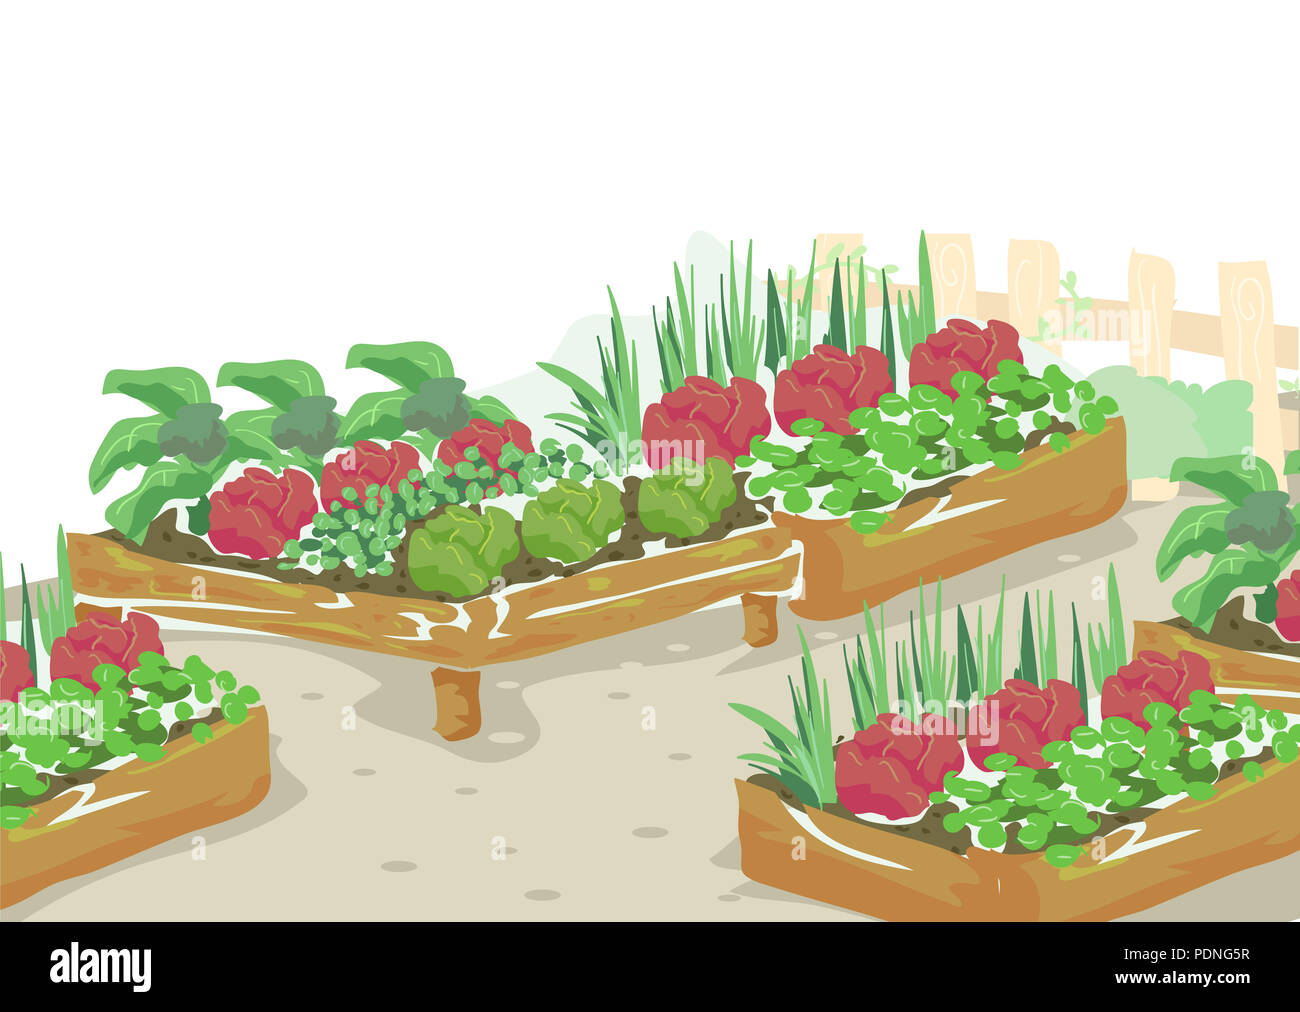 Illustration of Container Gardening with Different Edible Plants Ready for Harvest Stock Photo